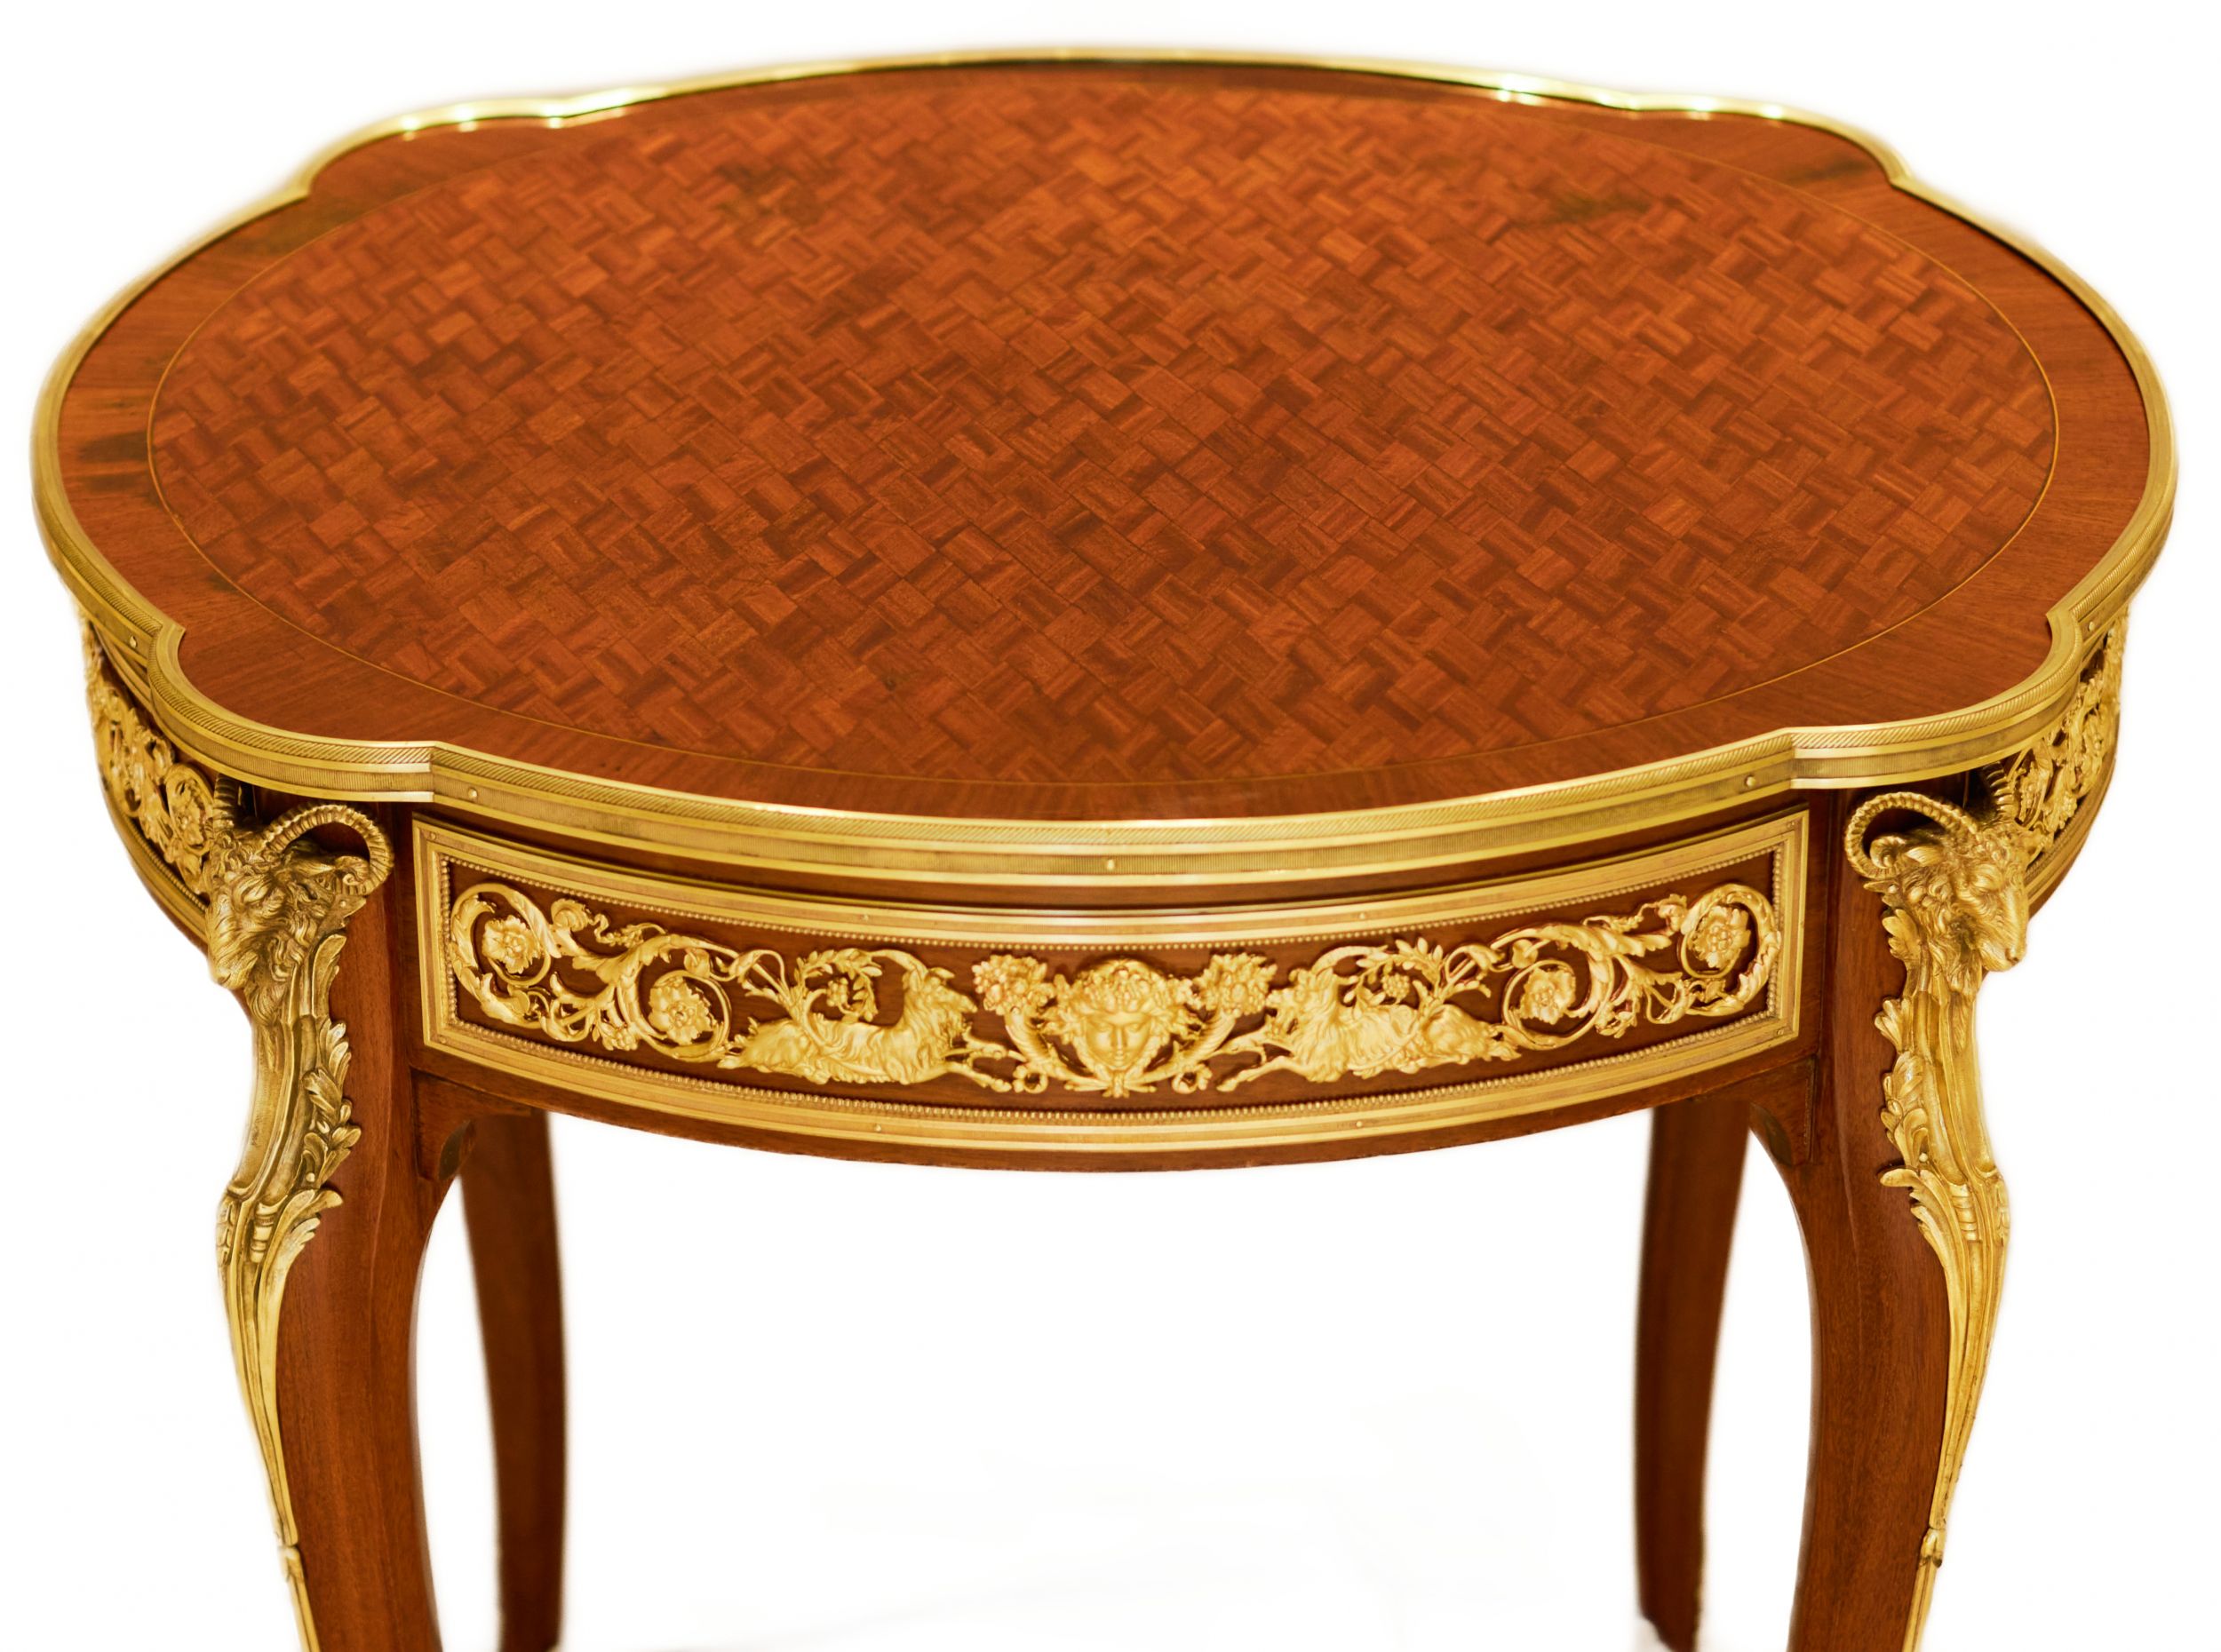 Mahogany table decorated with marquetry in the style of Louis XV, Francois Linke. Late 19th century - Image 5 of 6